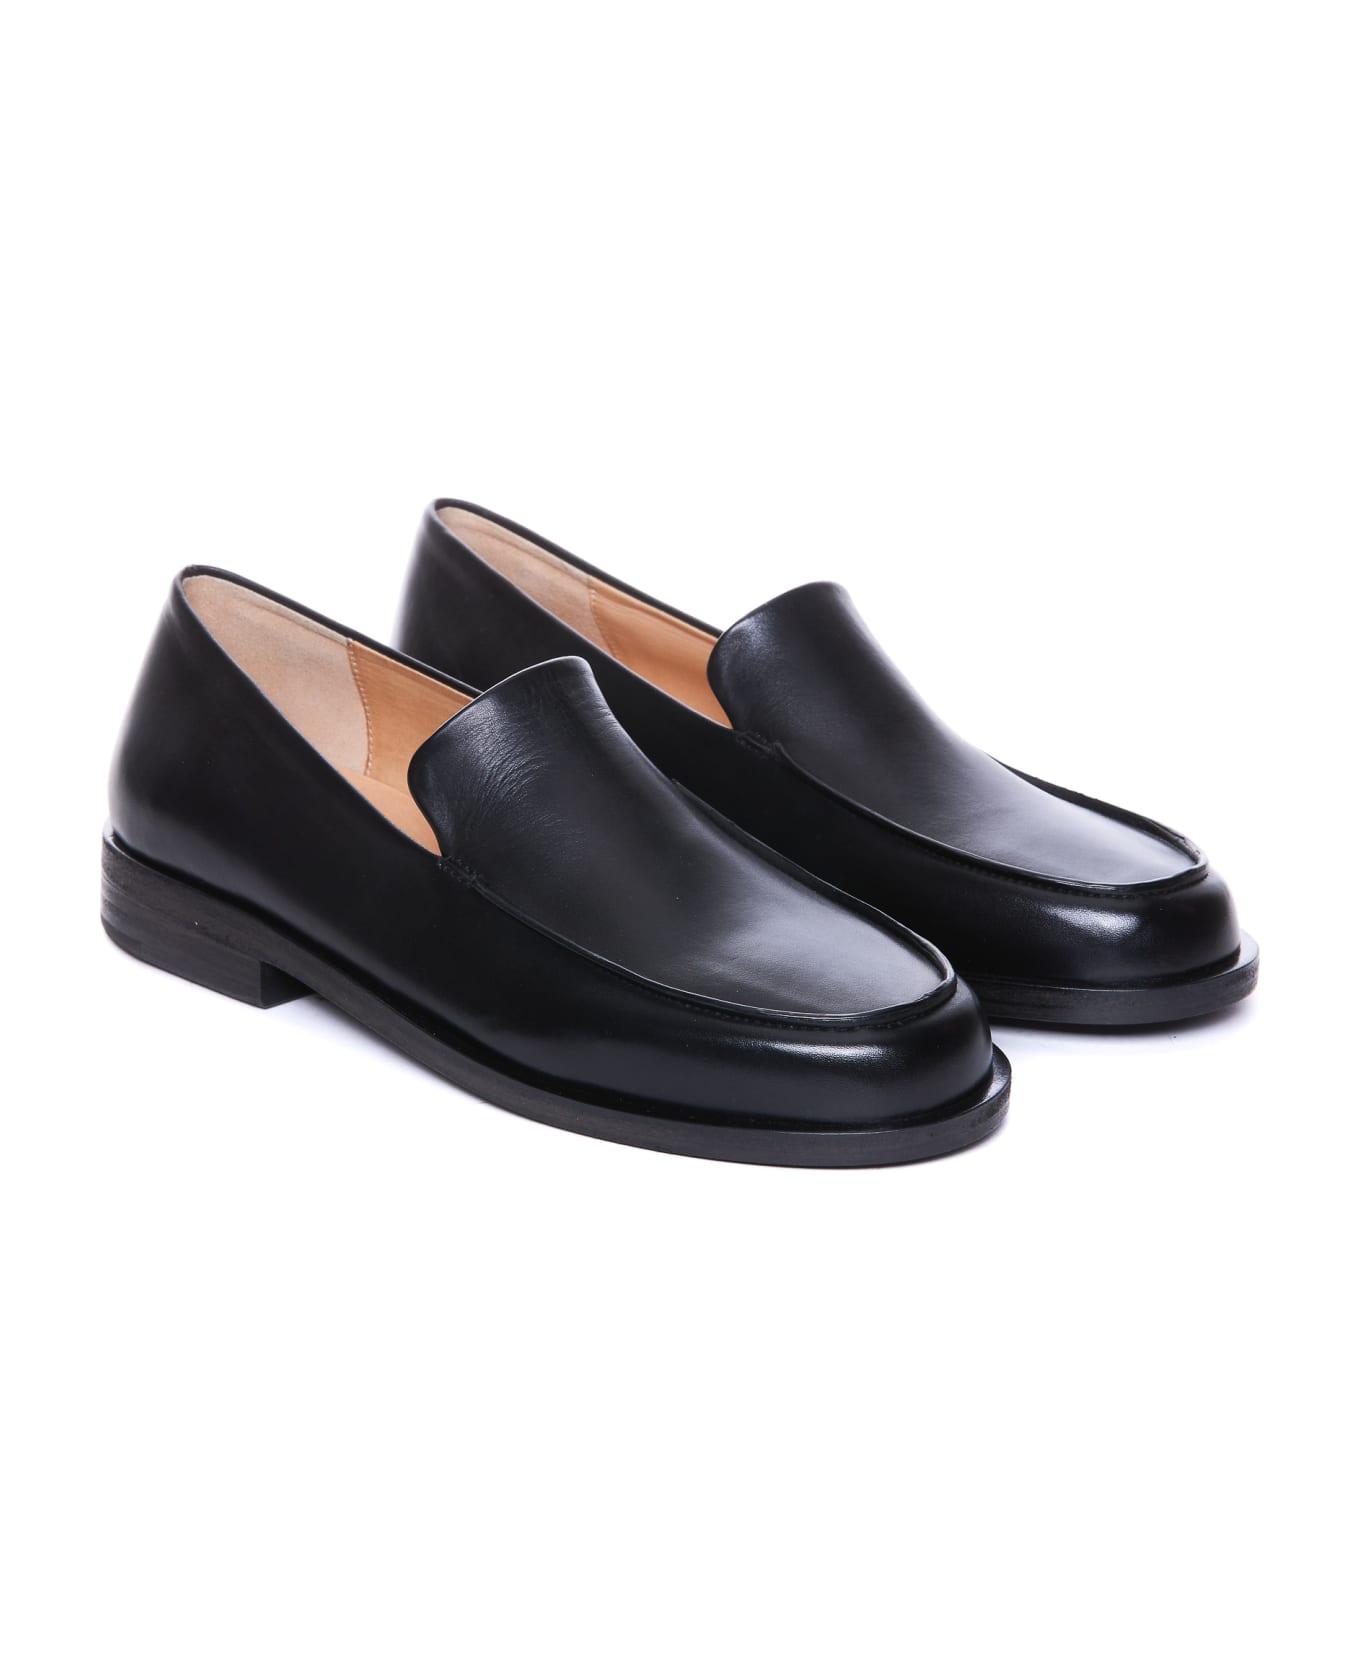 Marsell Loafers - Black フラットシューズ